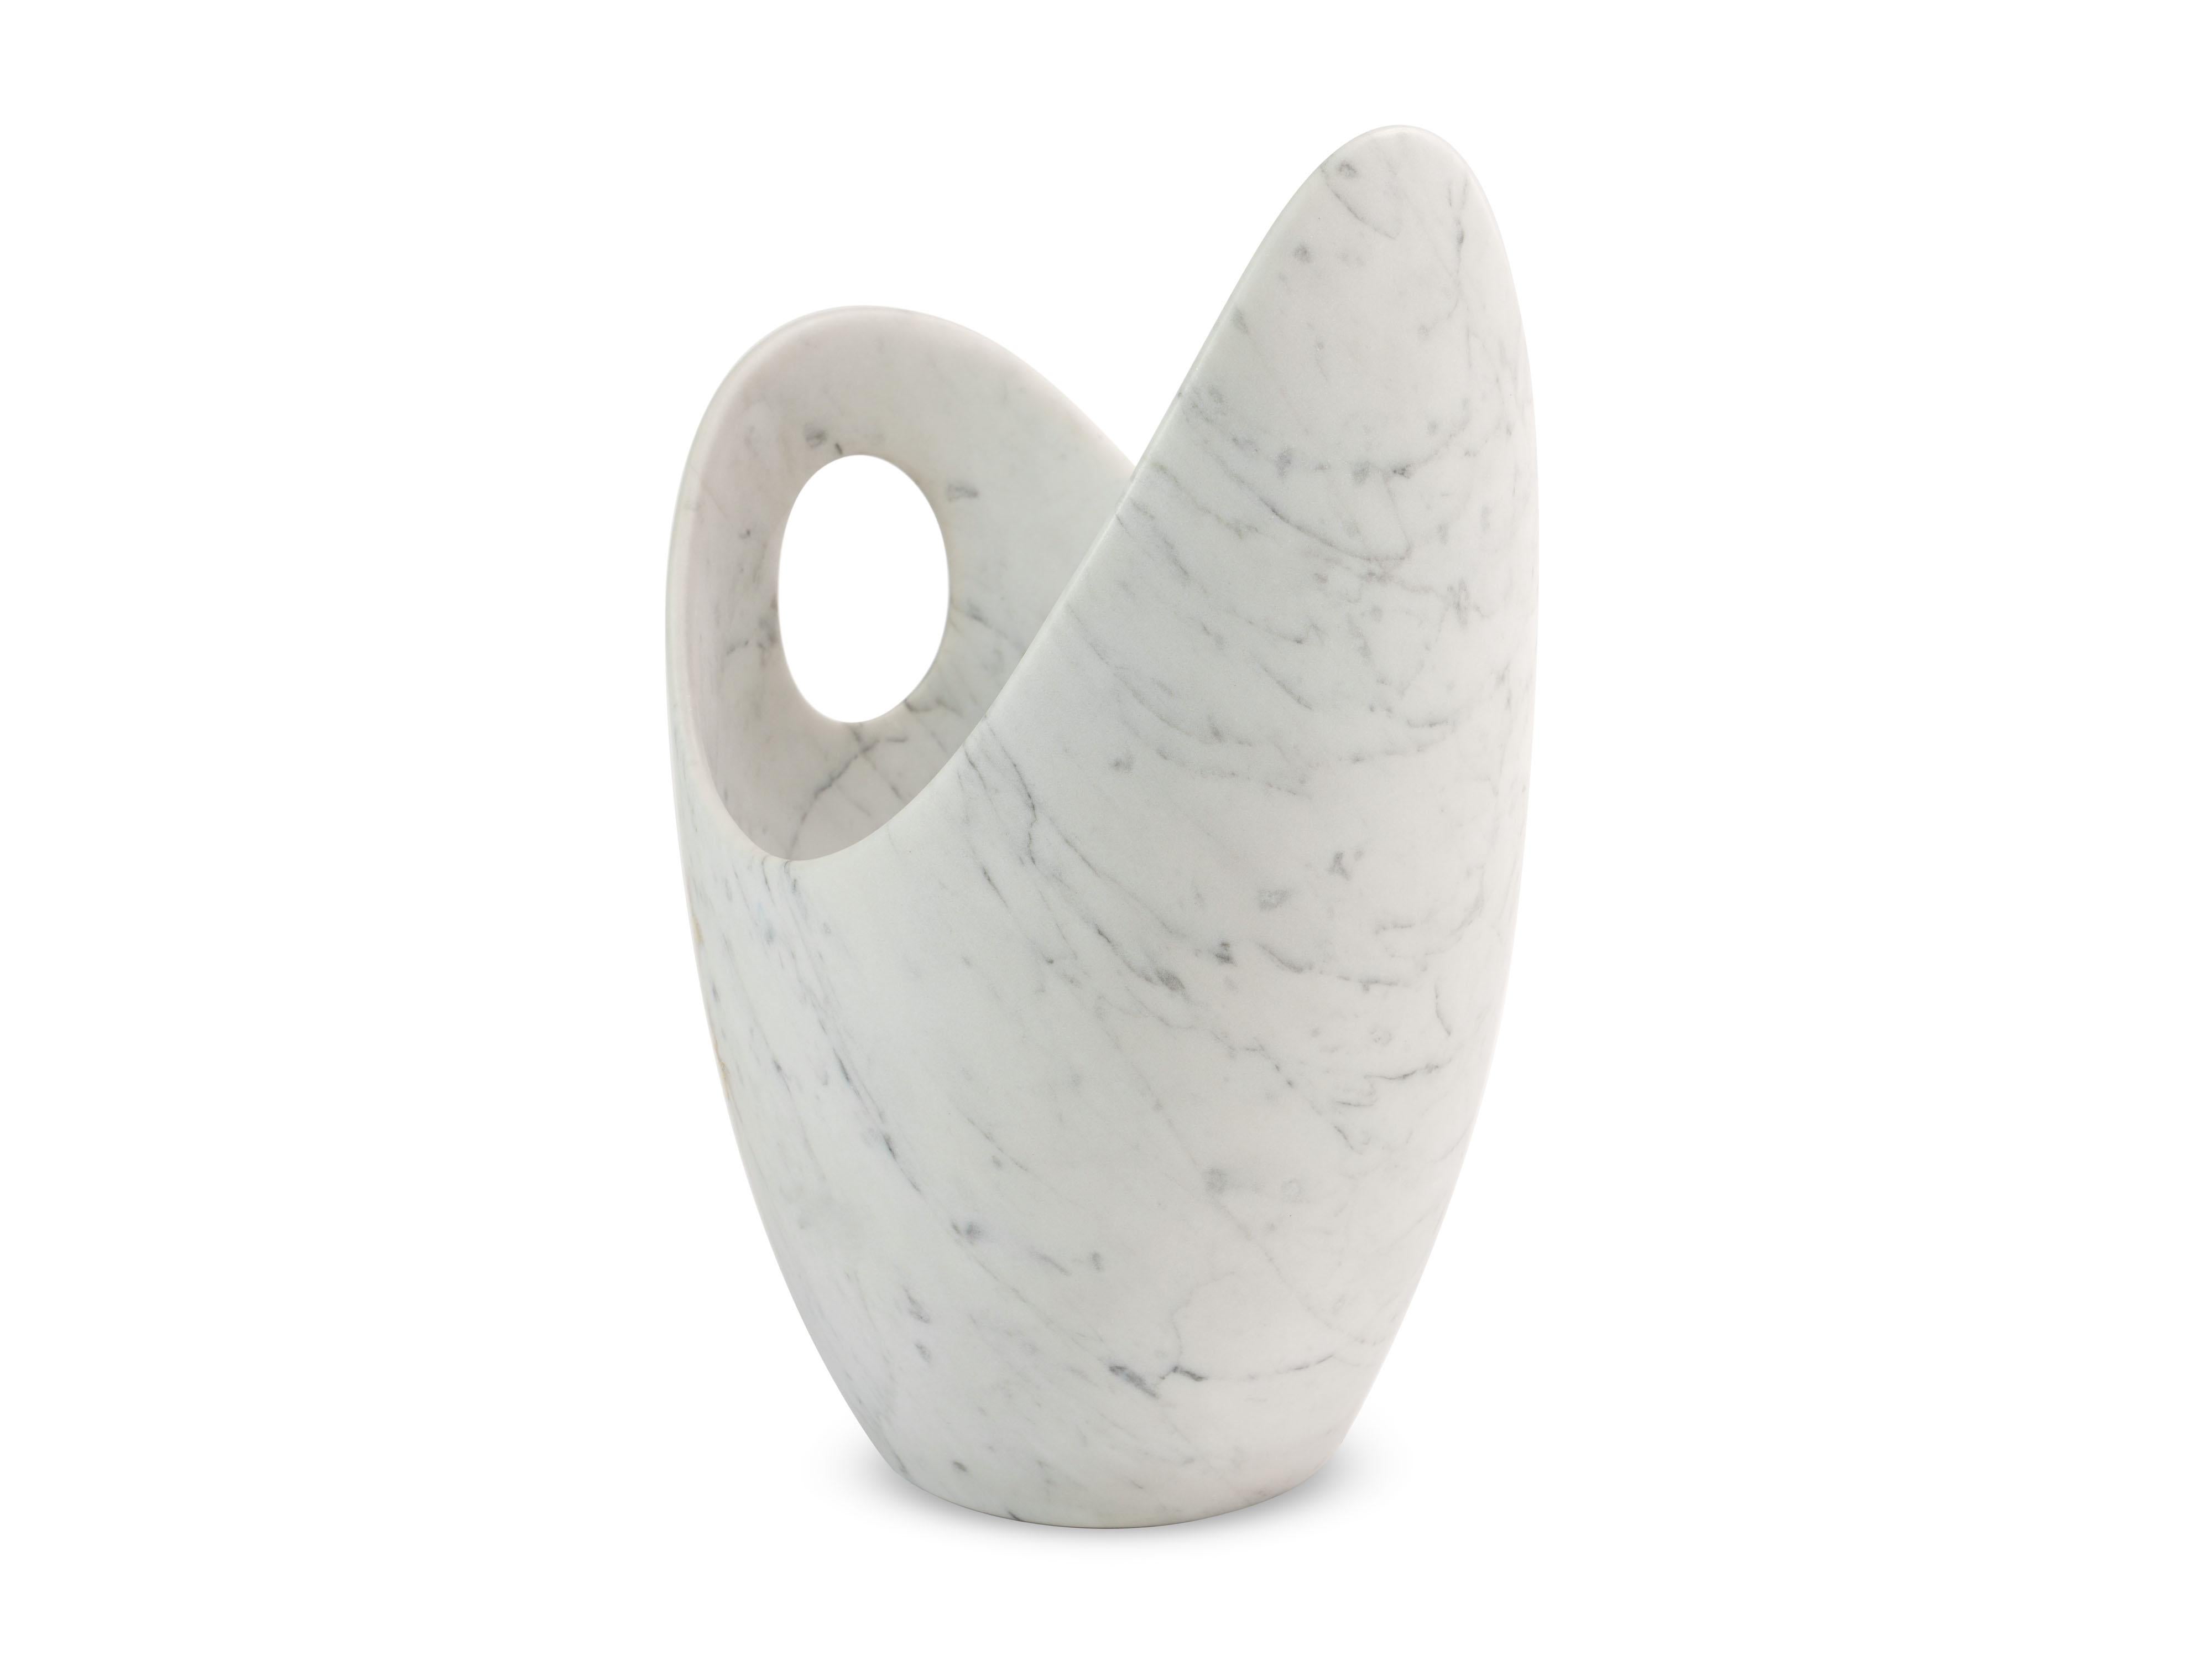 Champagne Bucket Wine Cooler Sculpture Block White Carrara Marble Made in Italy In New Condition For Sale In Ancona, Marche